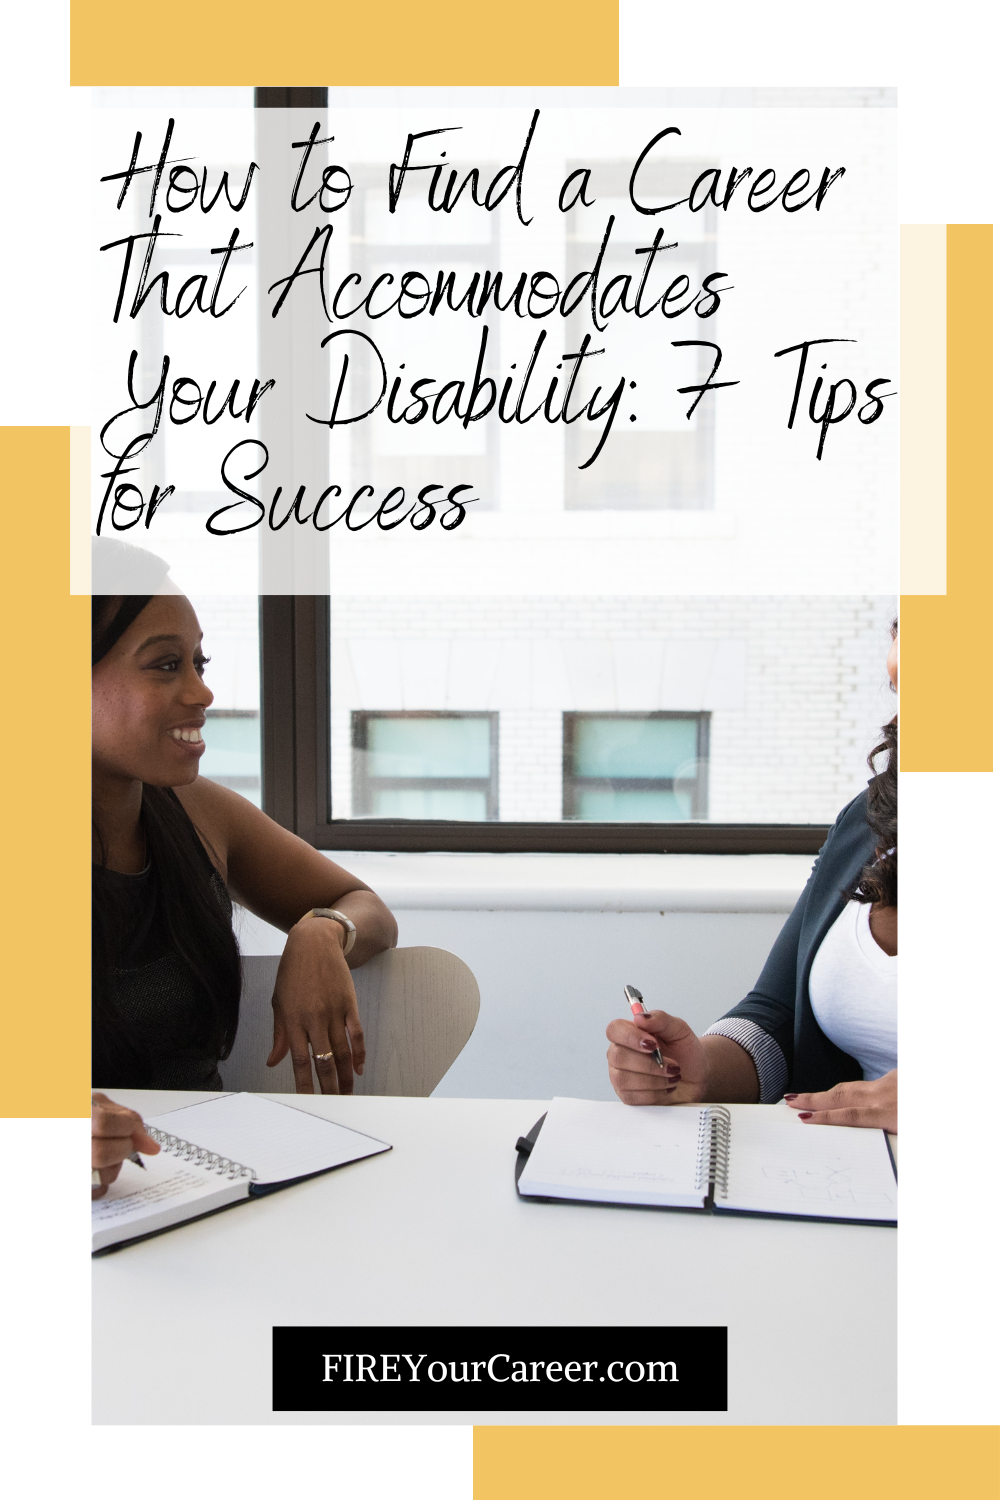 How to Find a Career That Accommodates Your Disability 7 Tips for Success